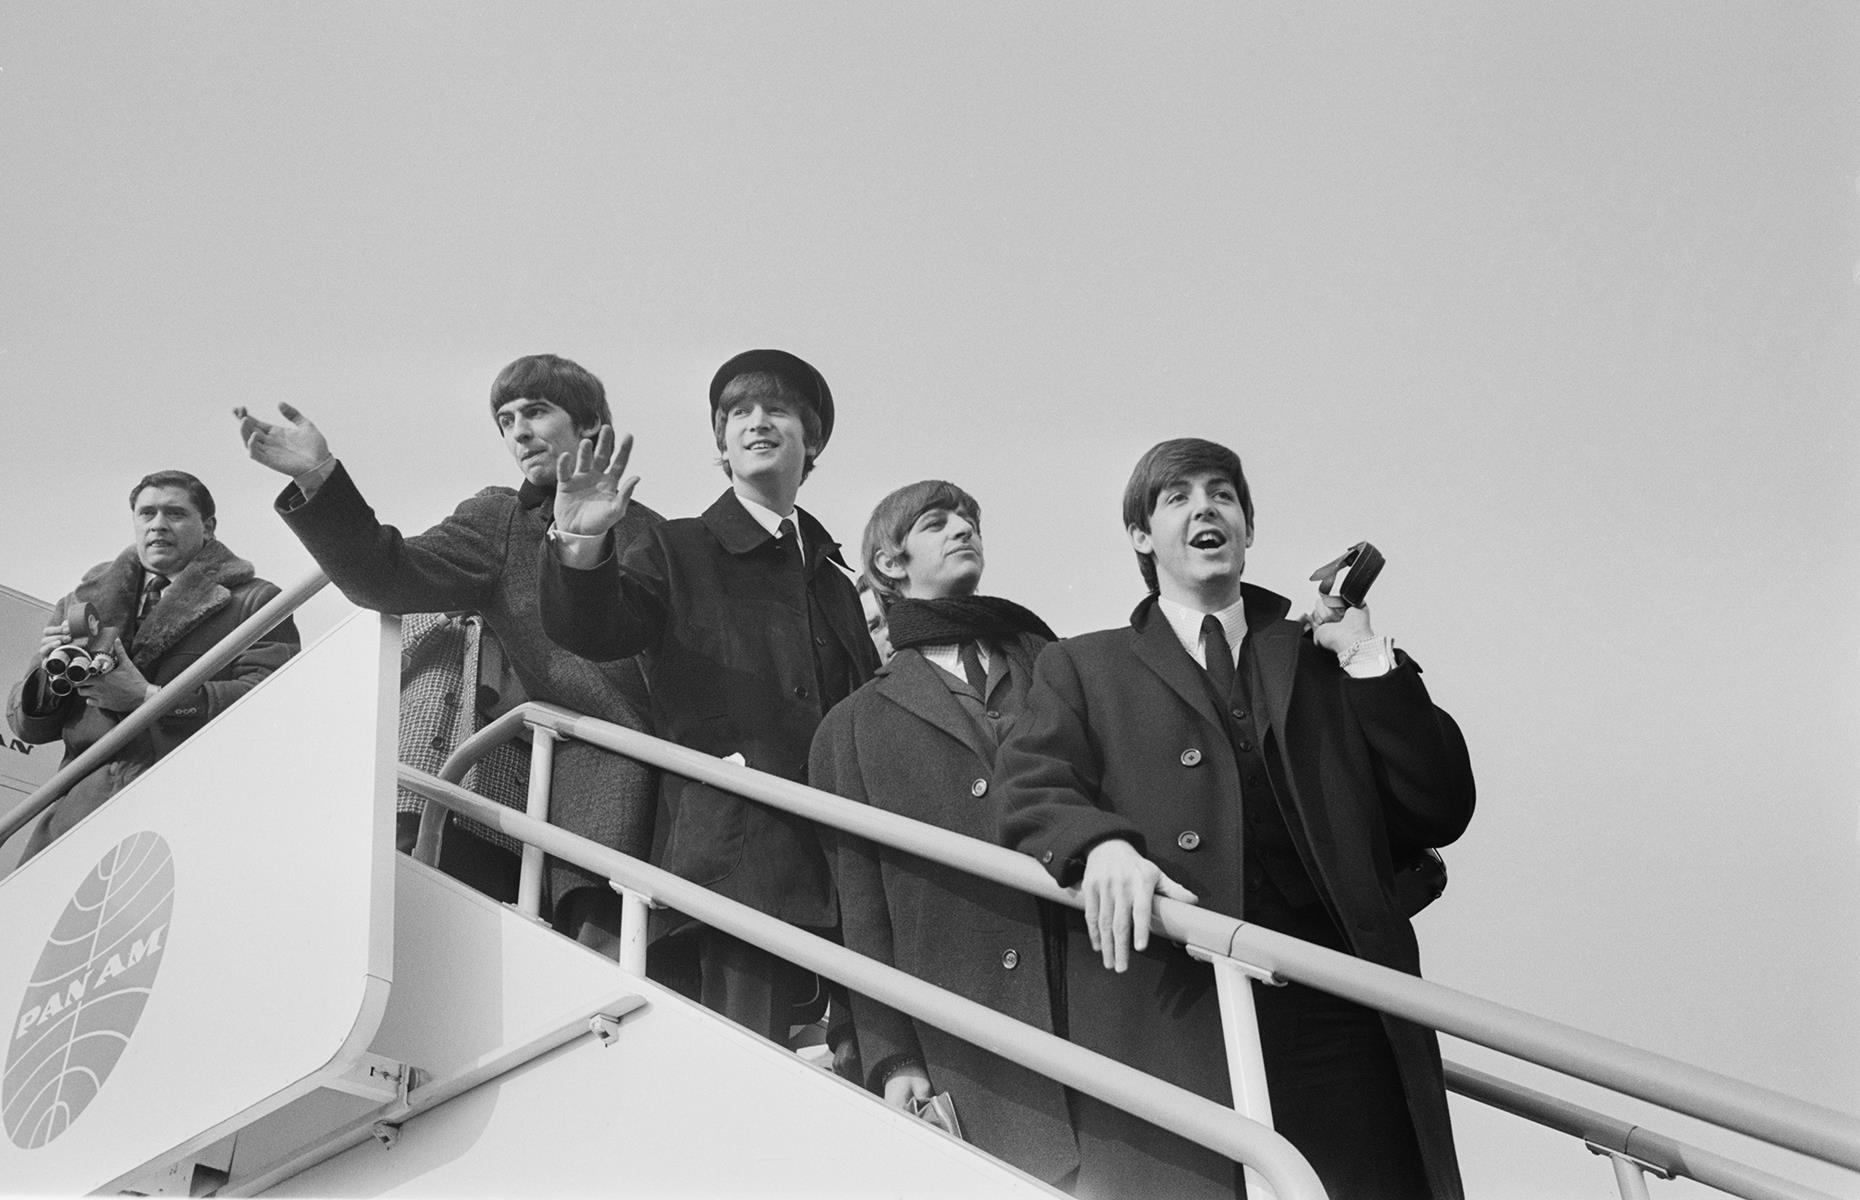 The term "jet-set" was coined to refer to those who were privileged enough to travel on these new commercial jet airliners. Among the regular passengers were the biggest celebrities of the day. Here, The Beatles are pictured in their heyday, leaving a Pan Am flight in London in 1964.